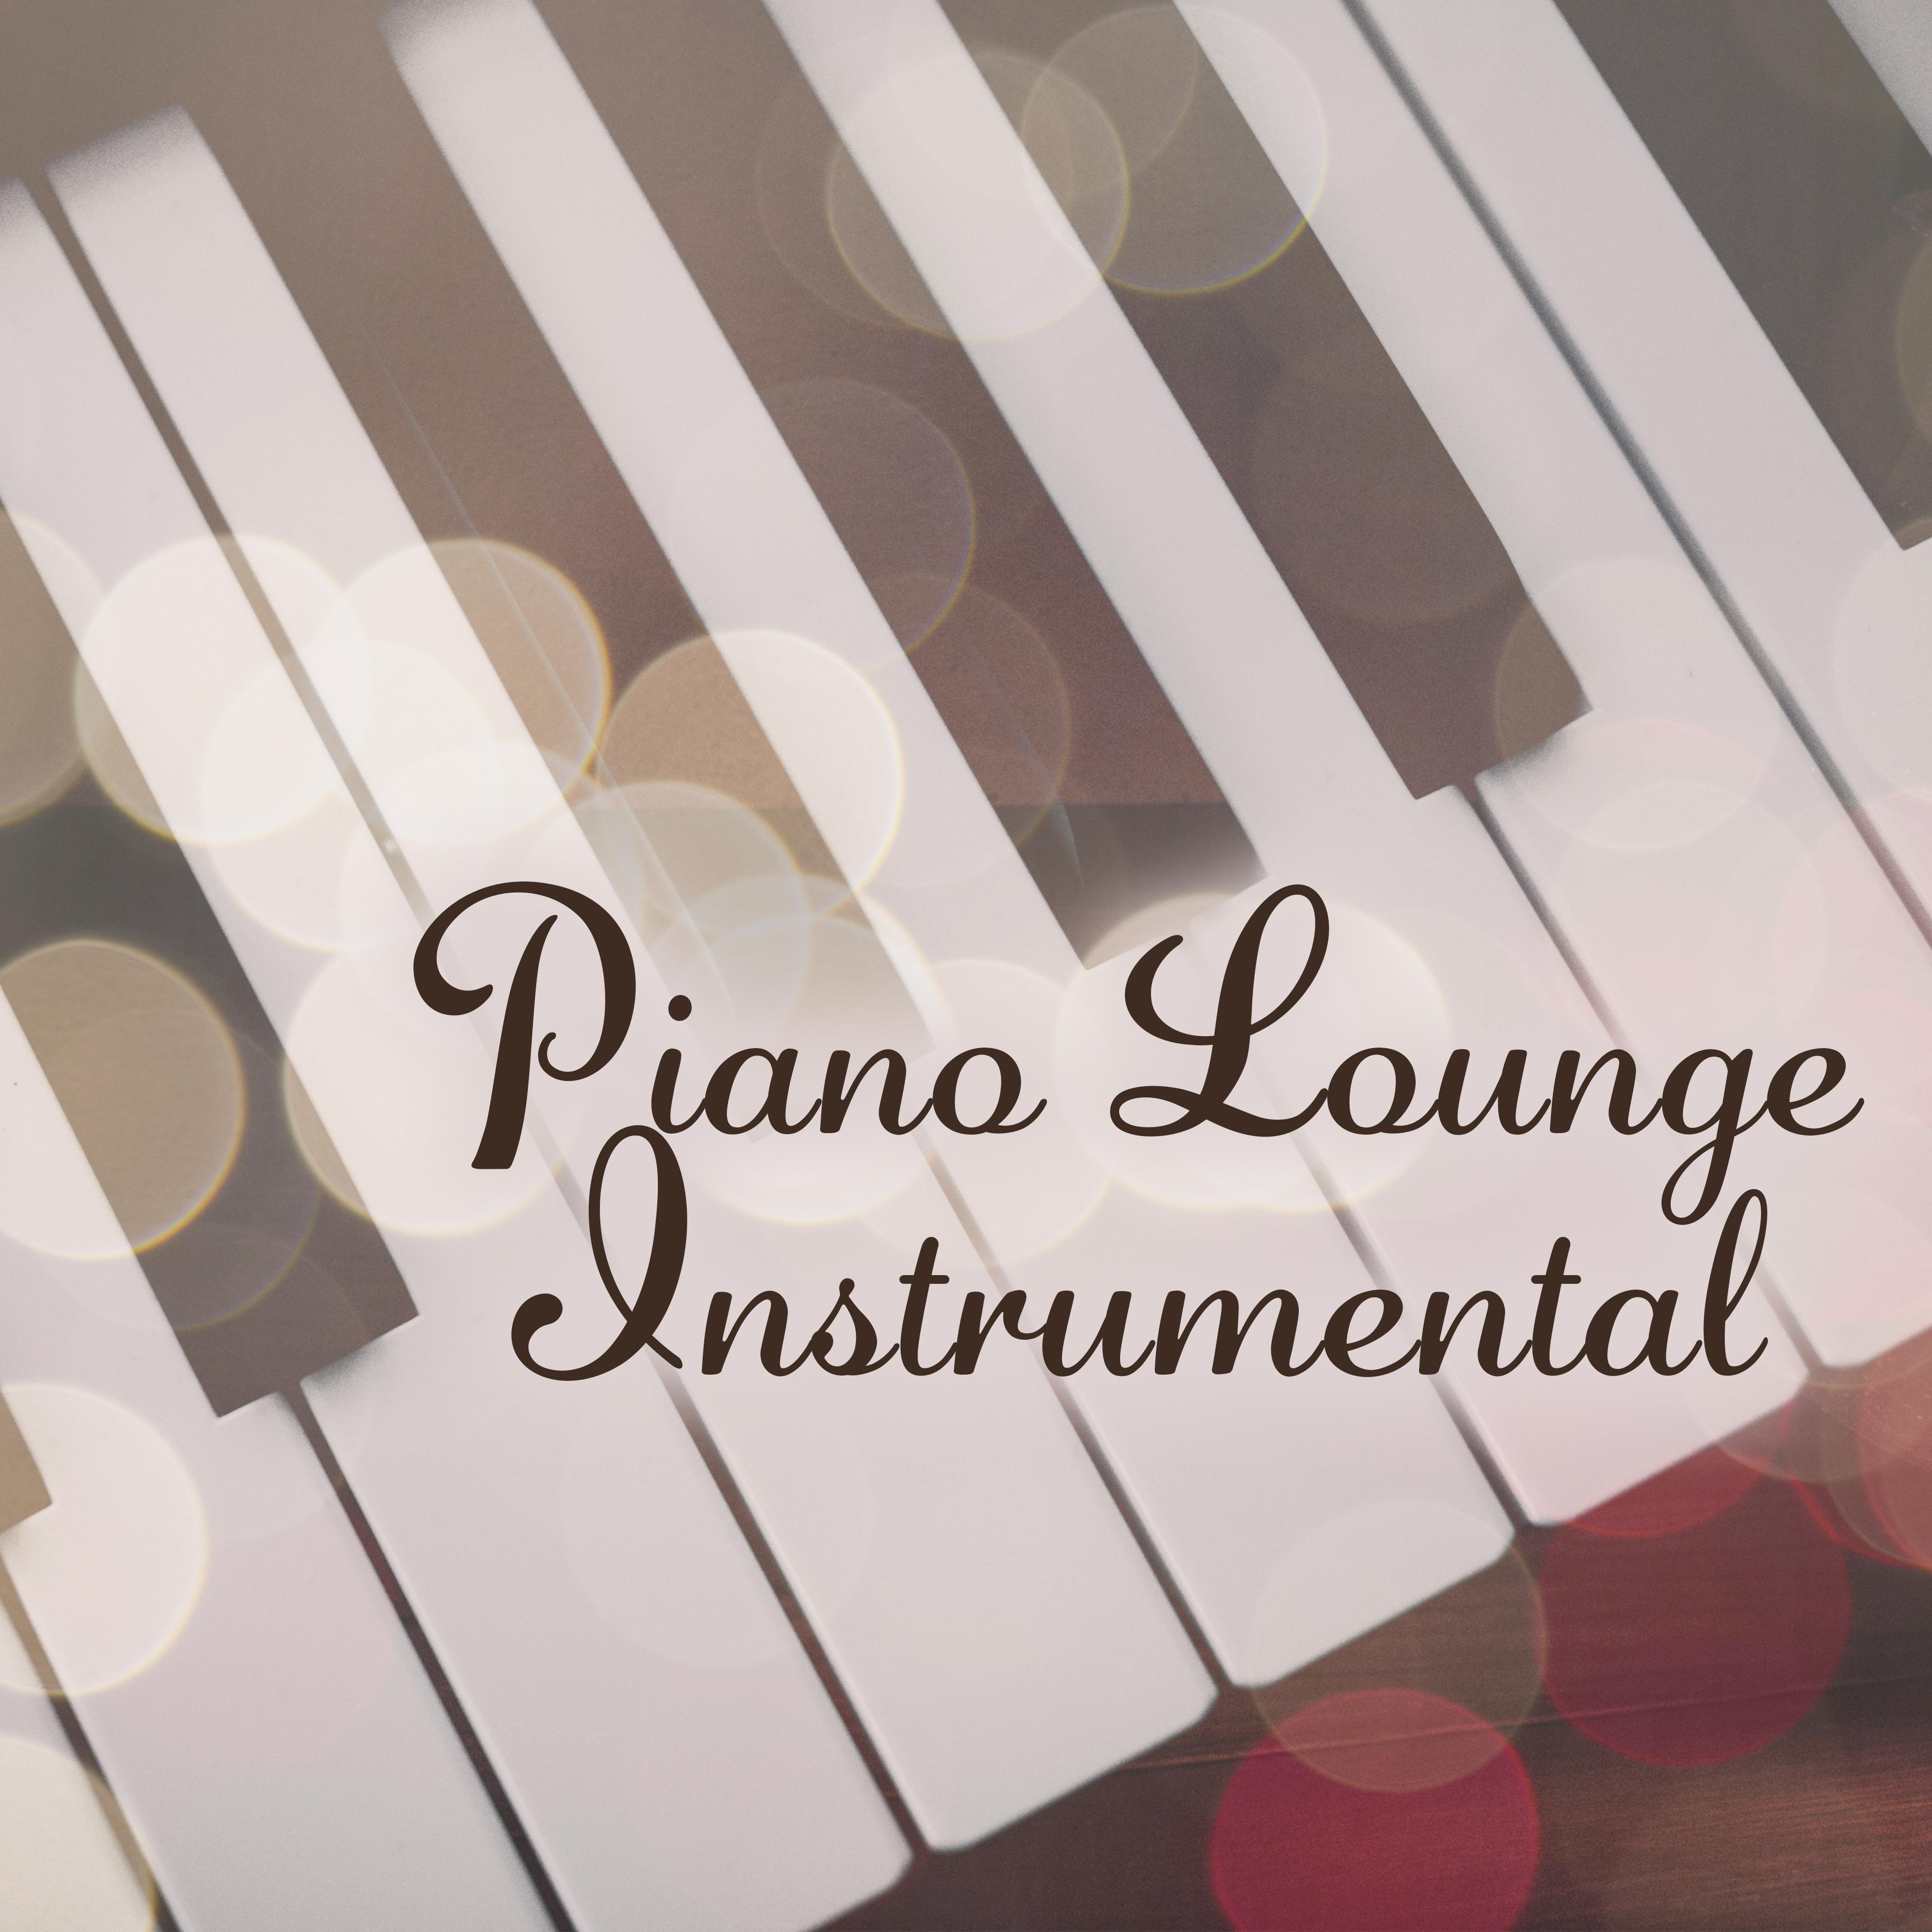 Piano Lounge Instrumental  Easy Listening Music, Mellow Jazz Sounds, Jazz Lounge, Simple Piano